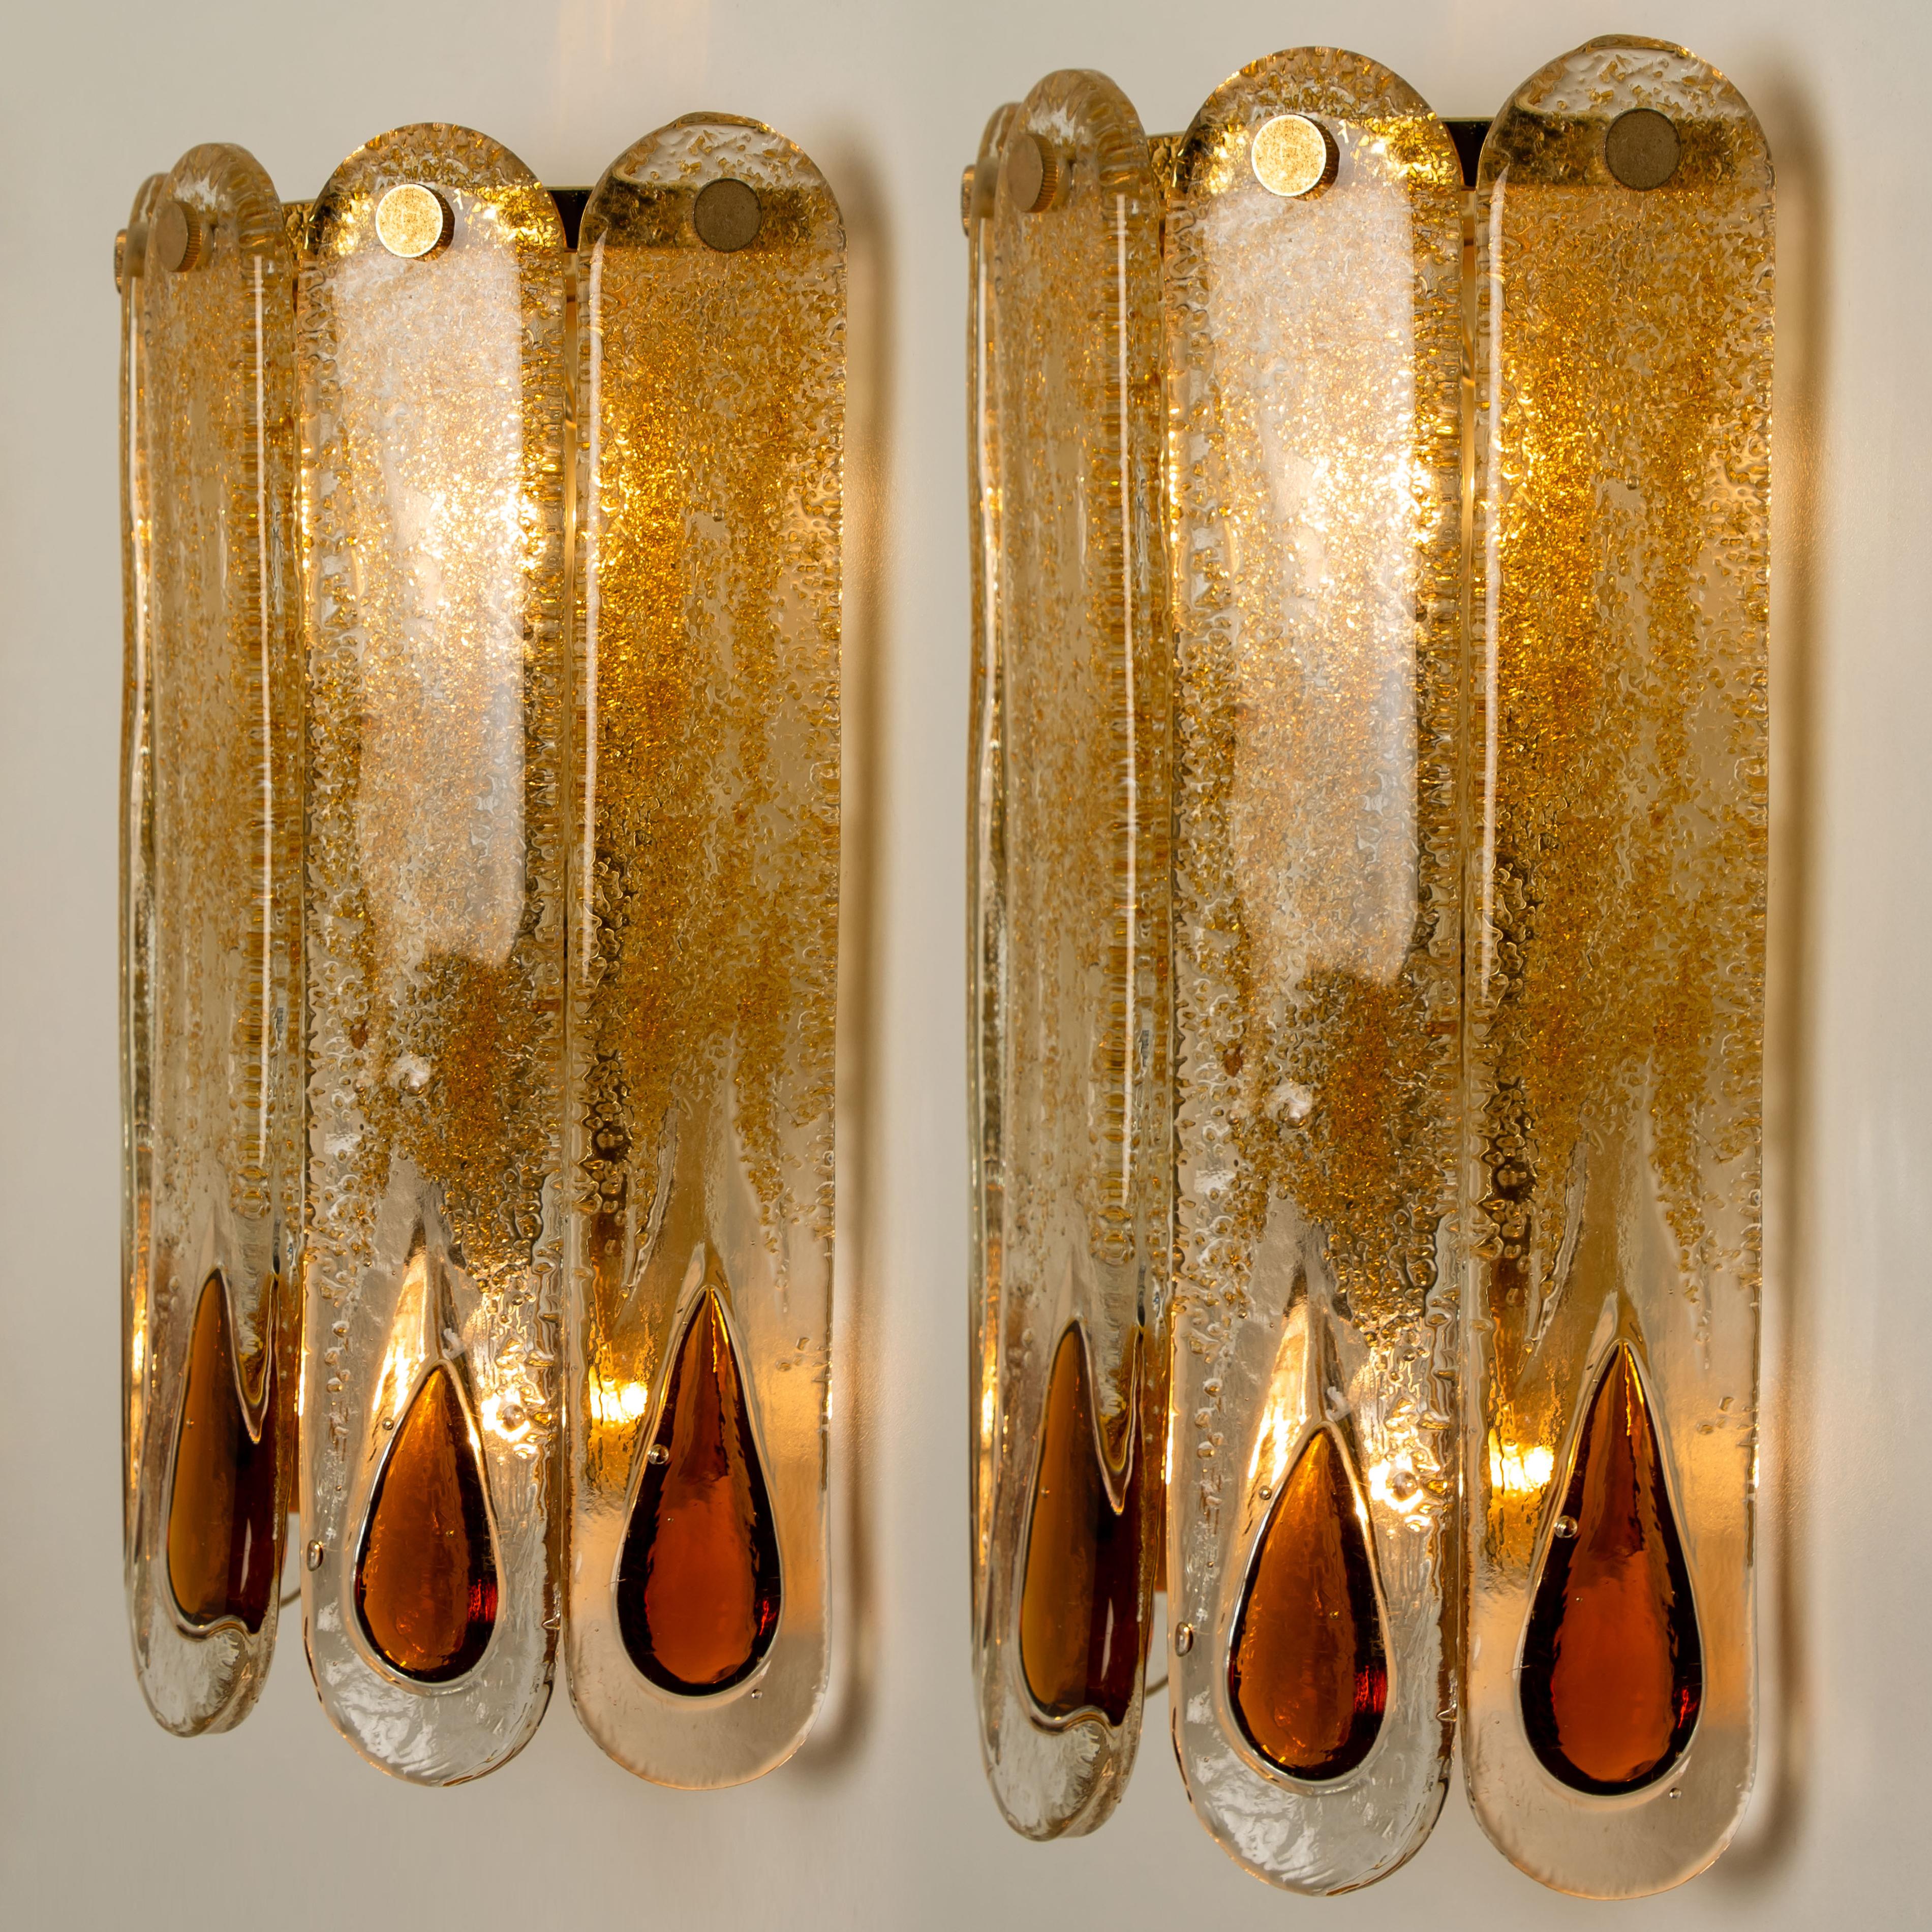 Beautiful amber tear drops wall lights designer: Carlo Nason (born 1935), manufactured by AV Mazzega, Murano, Italy. Brown, amber, orange and clear crystal hand blown Murano glass with brass frame. Flat rods inserted with real gold flakes of gold